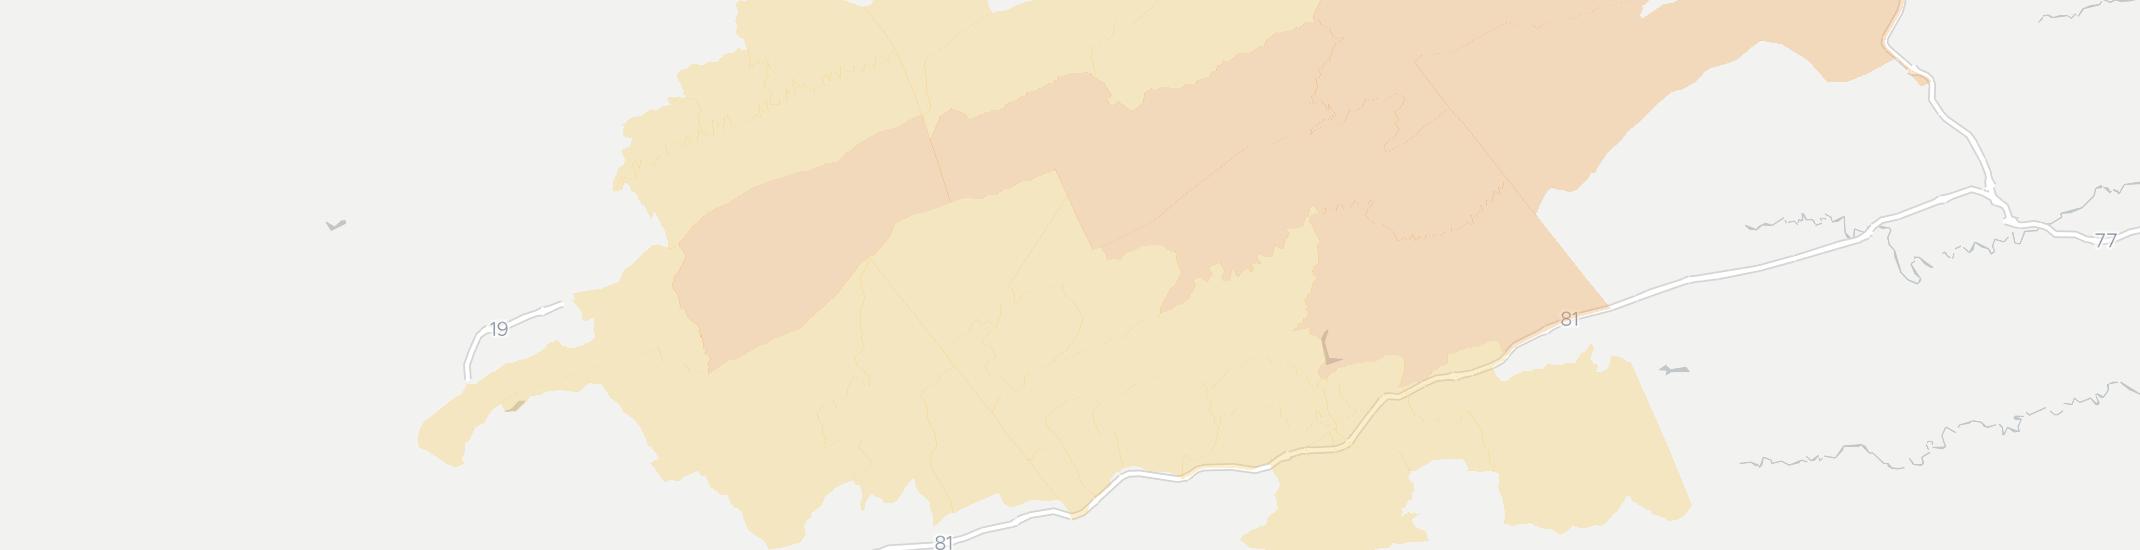 Saltville Internet Competition Map. Click for interactive map.